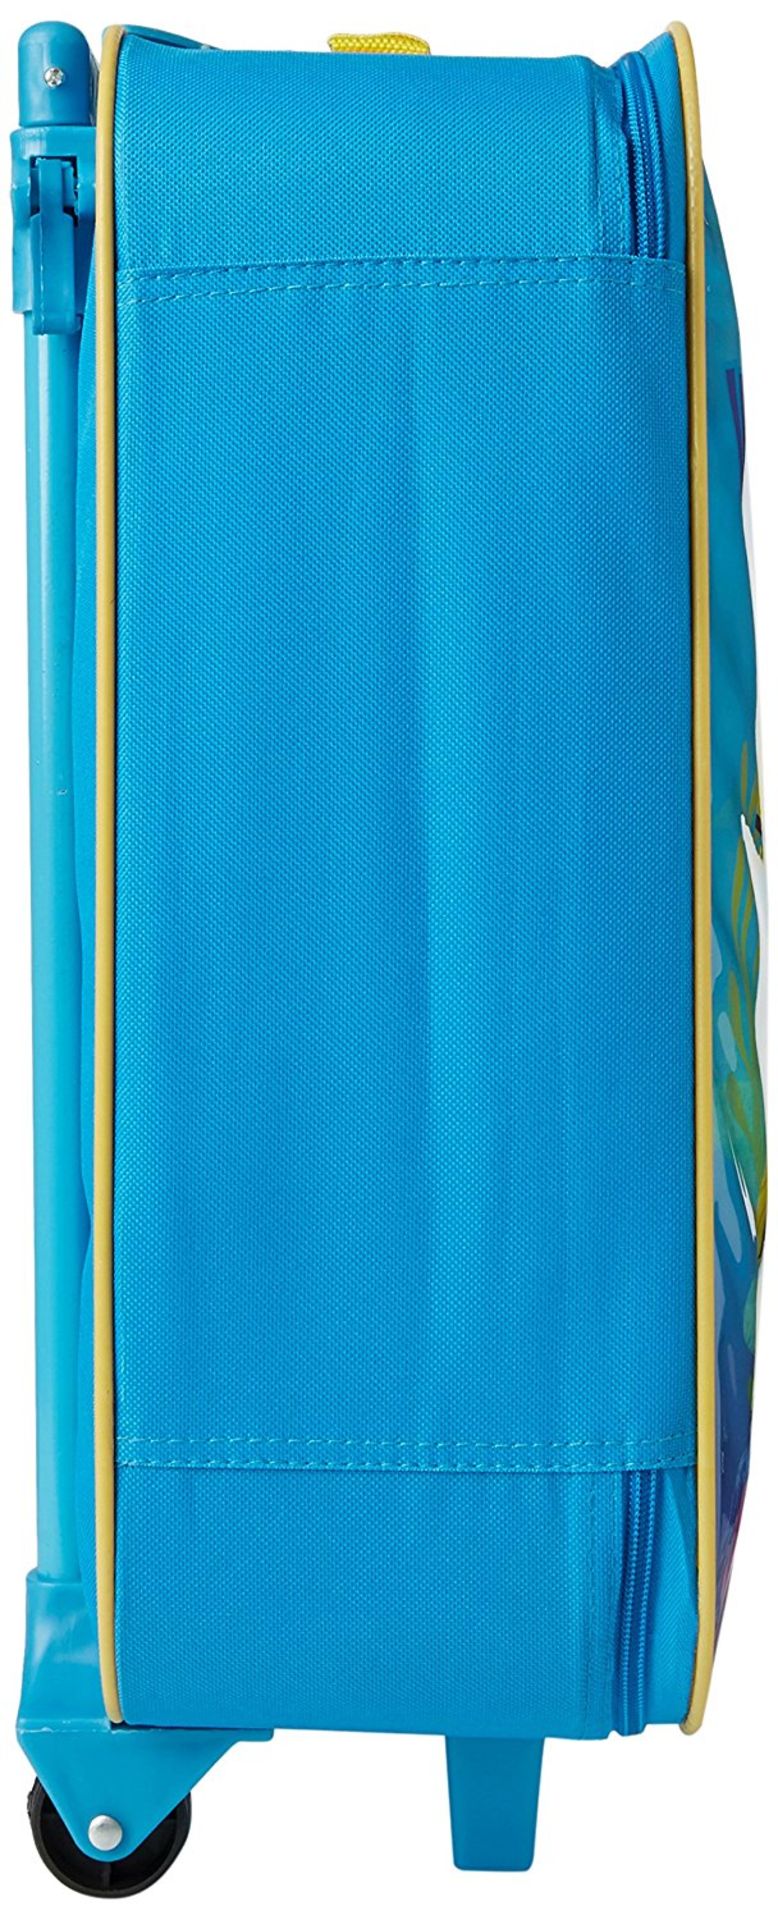 72 X Disney Finding Dory 3Pce Travel Trolley Luggage Set [Brand New In Retail Packaging] - Image 3 of 6